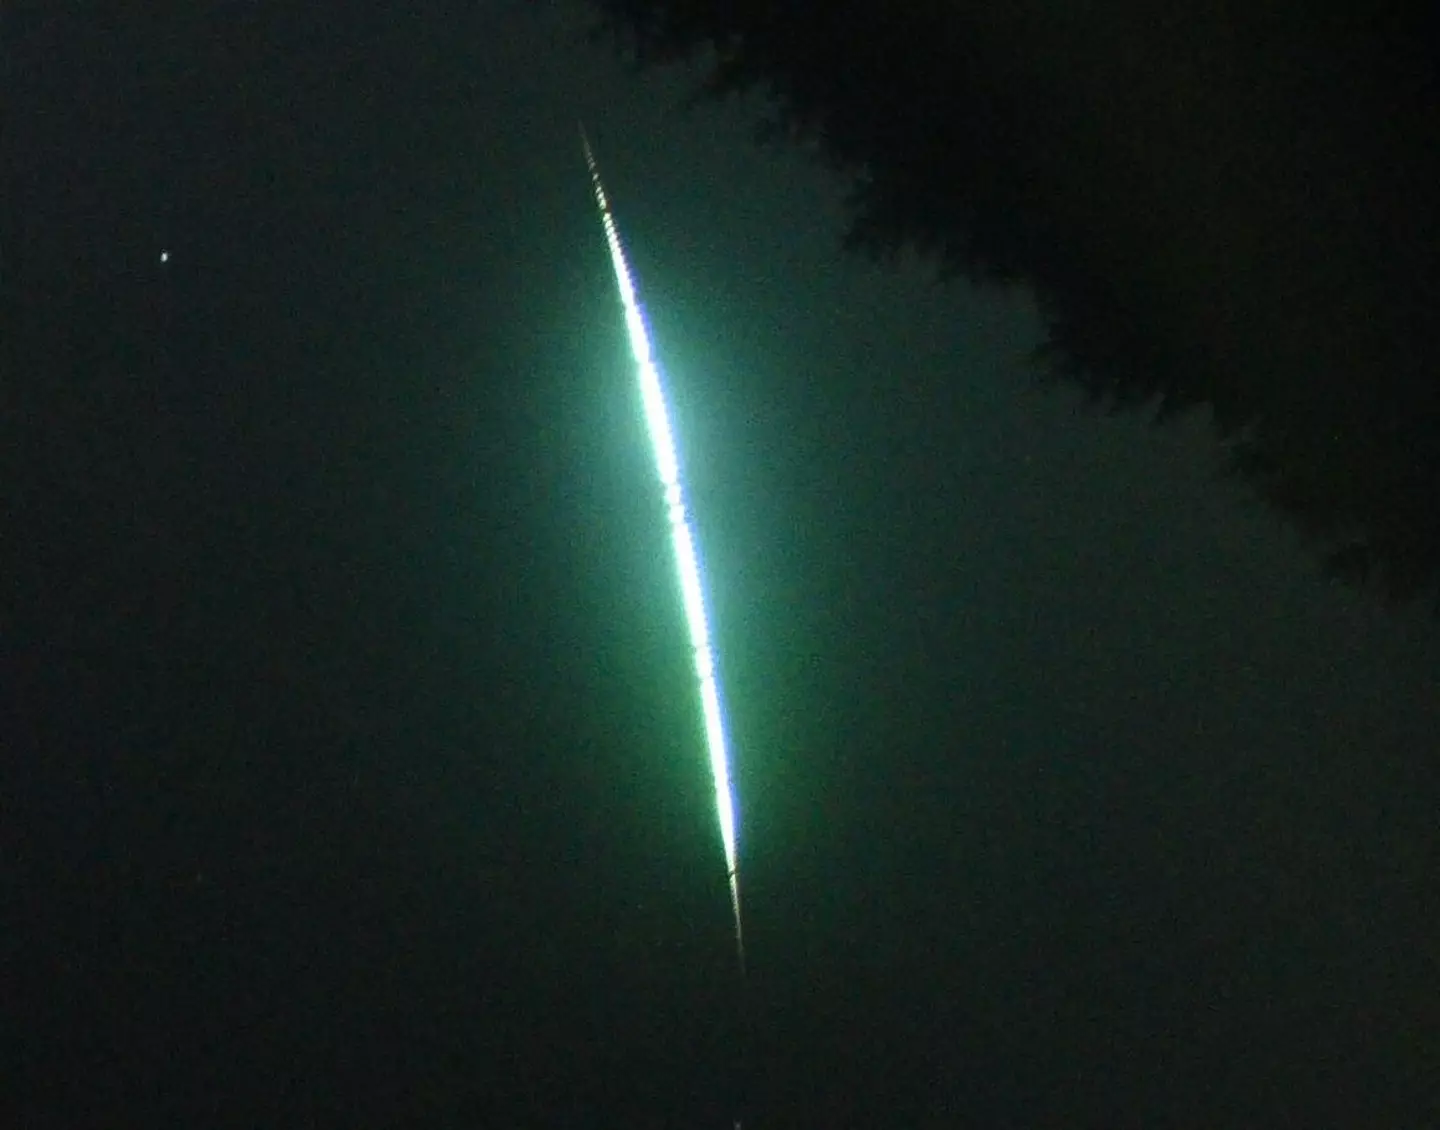 Many members of the public were lucky enough to catch a glimpse of the meteor which struck Earth's surface on 12 May.